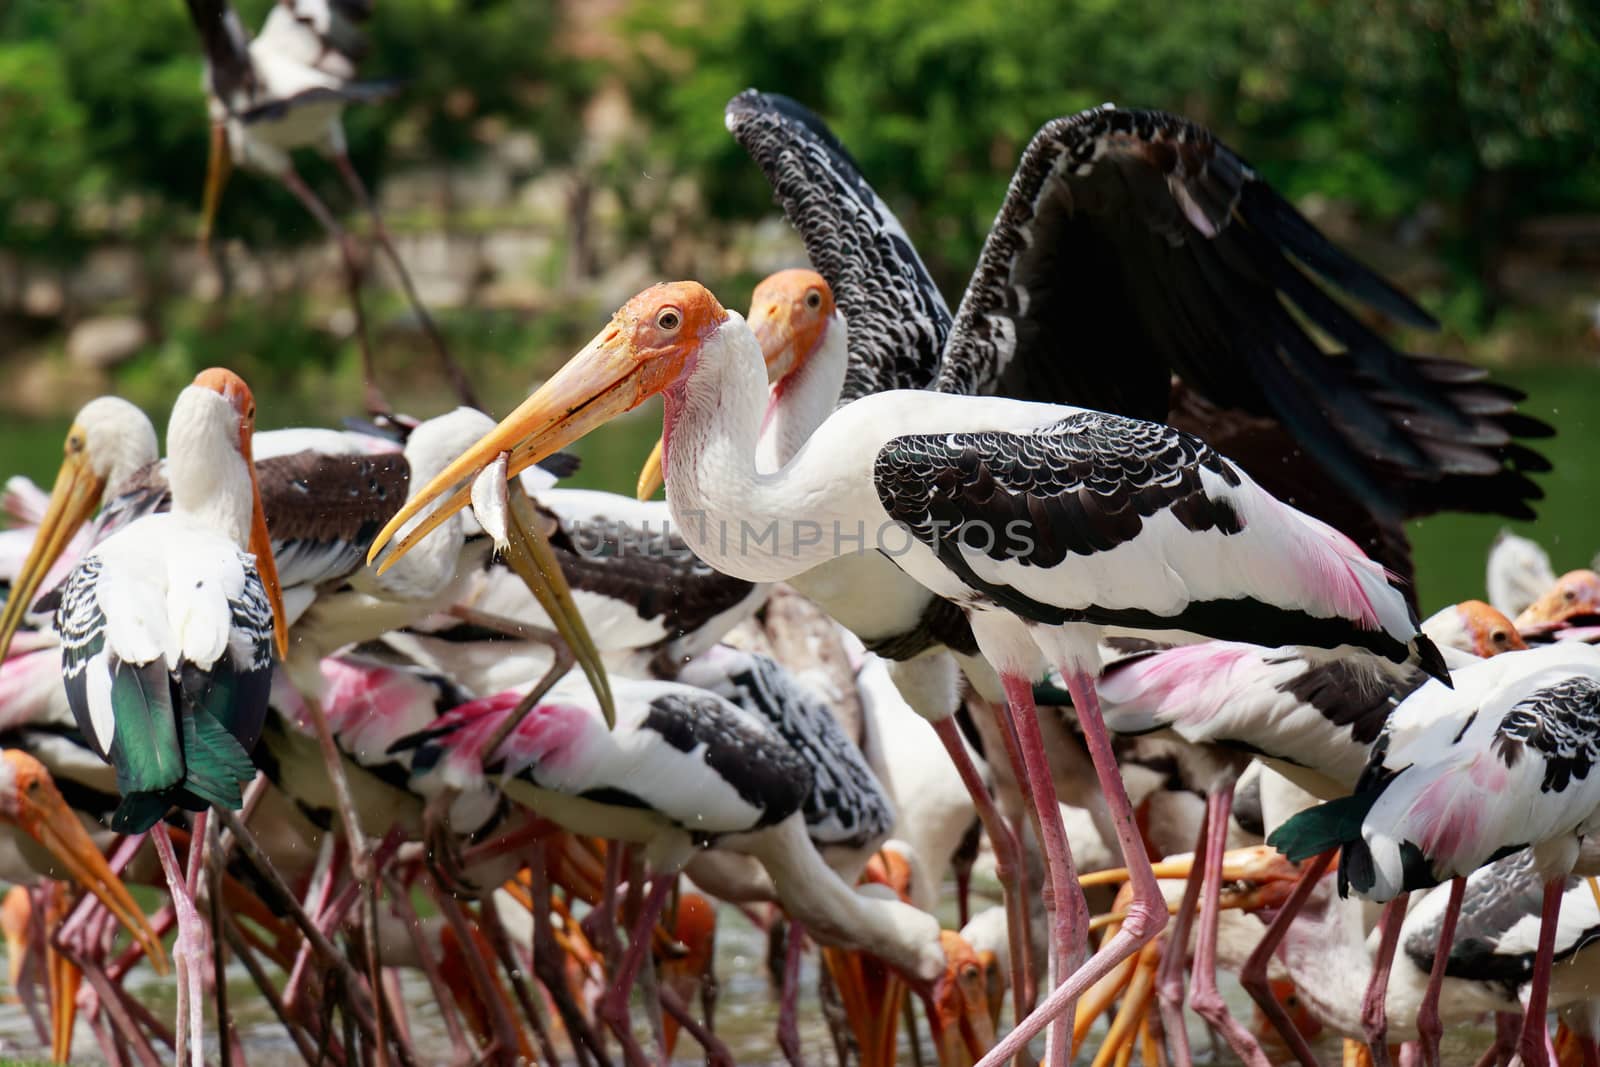 Group of pelicans catch fish from lake river. Pelican bird wallpaper , background by asiandelight